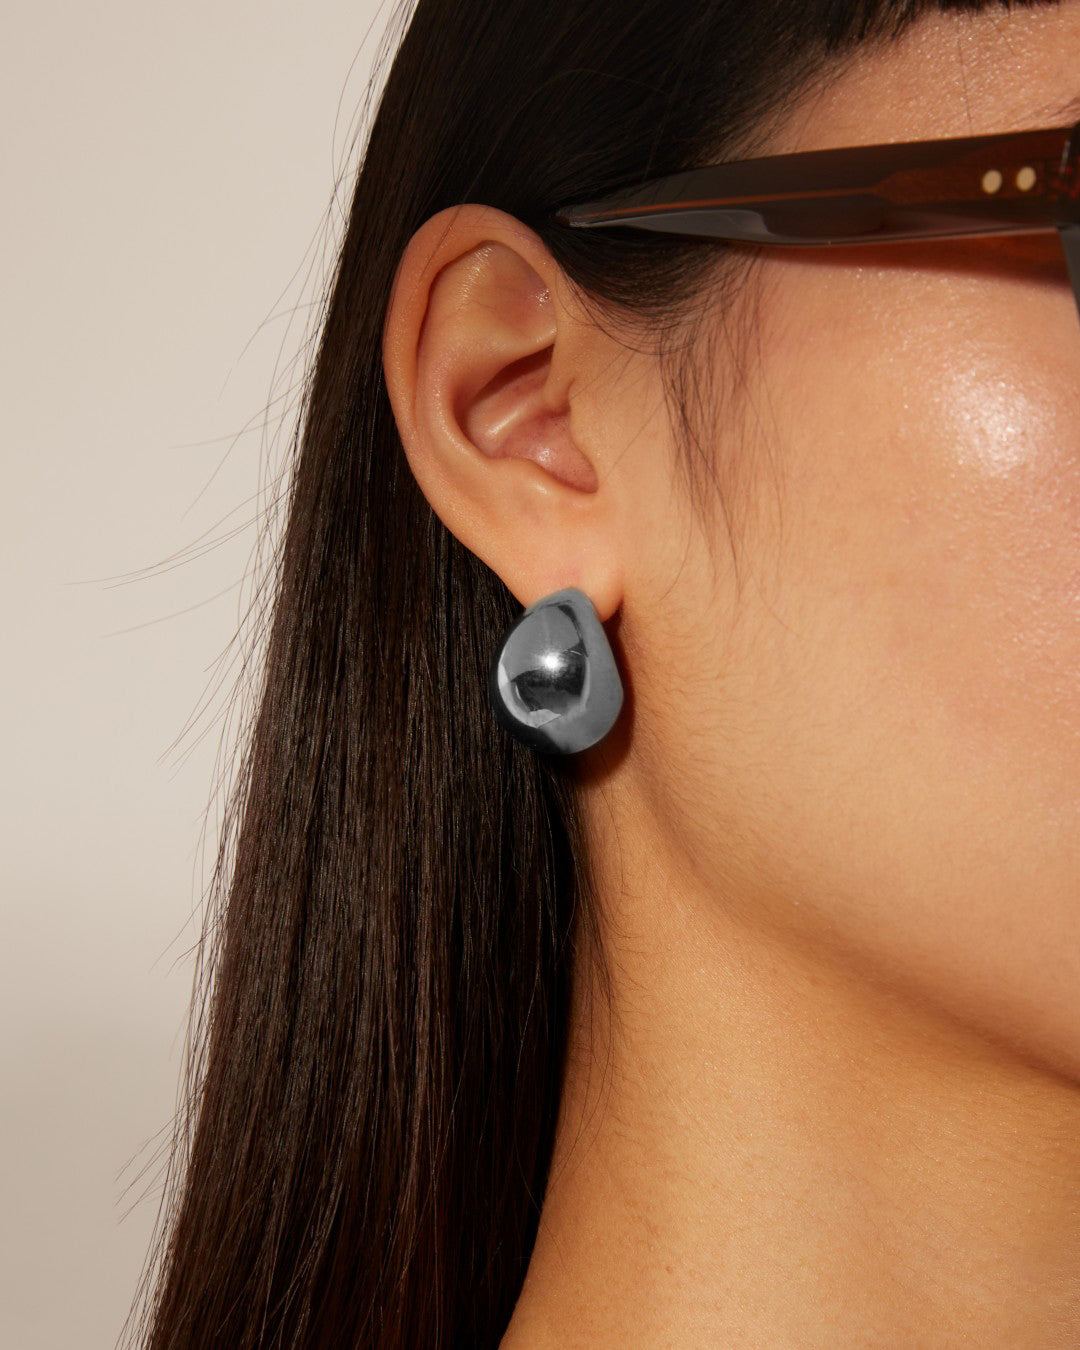 A close-up image of a person with long, dark hair wearing shiny, teardrop-shaped For Art's Sake® Orbit Earrings Silver. The individual is also wearing large, dark-framed glasses. The background is a neutral, light color.